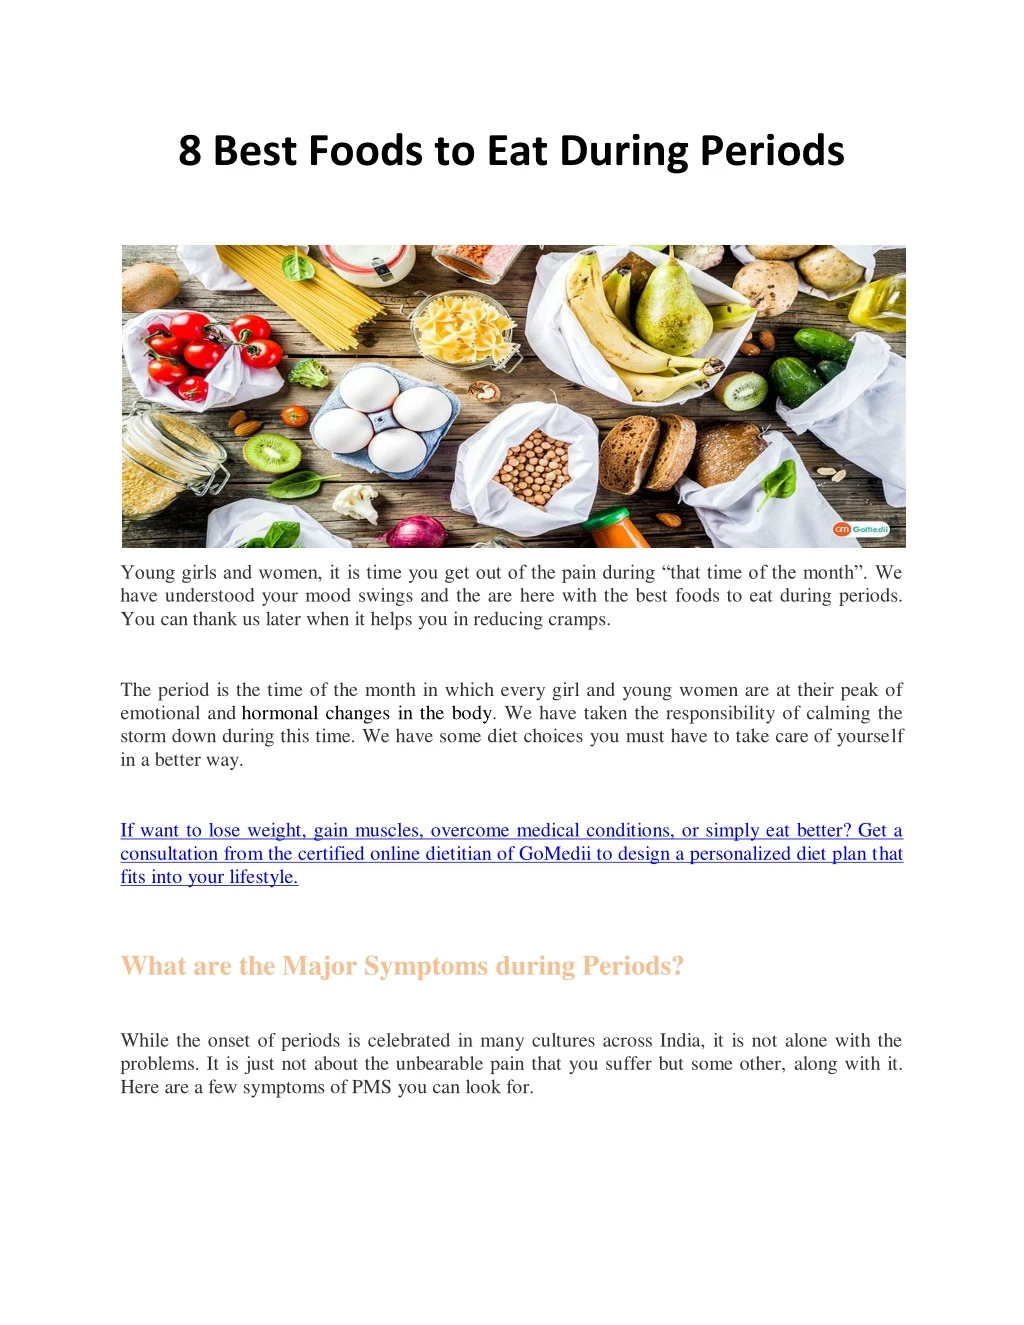 8 best foods to eat during periods